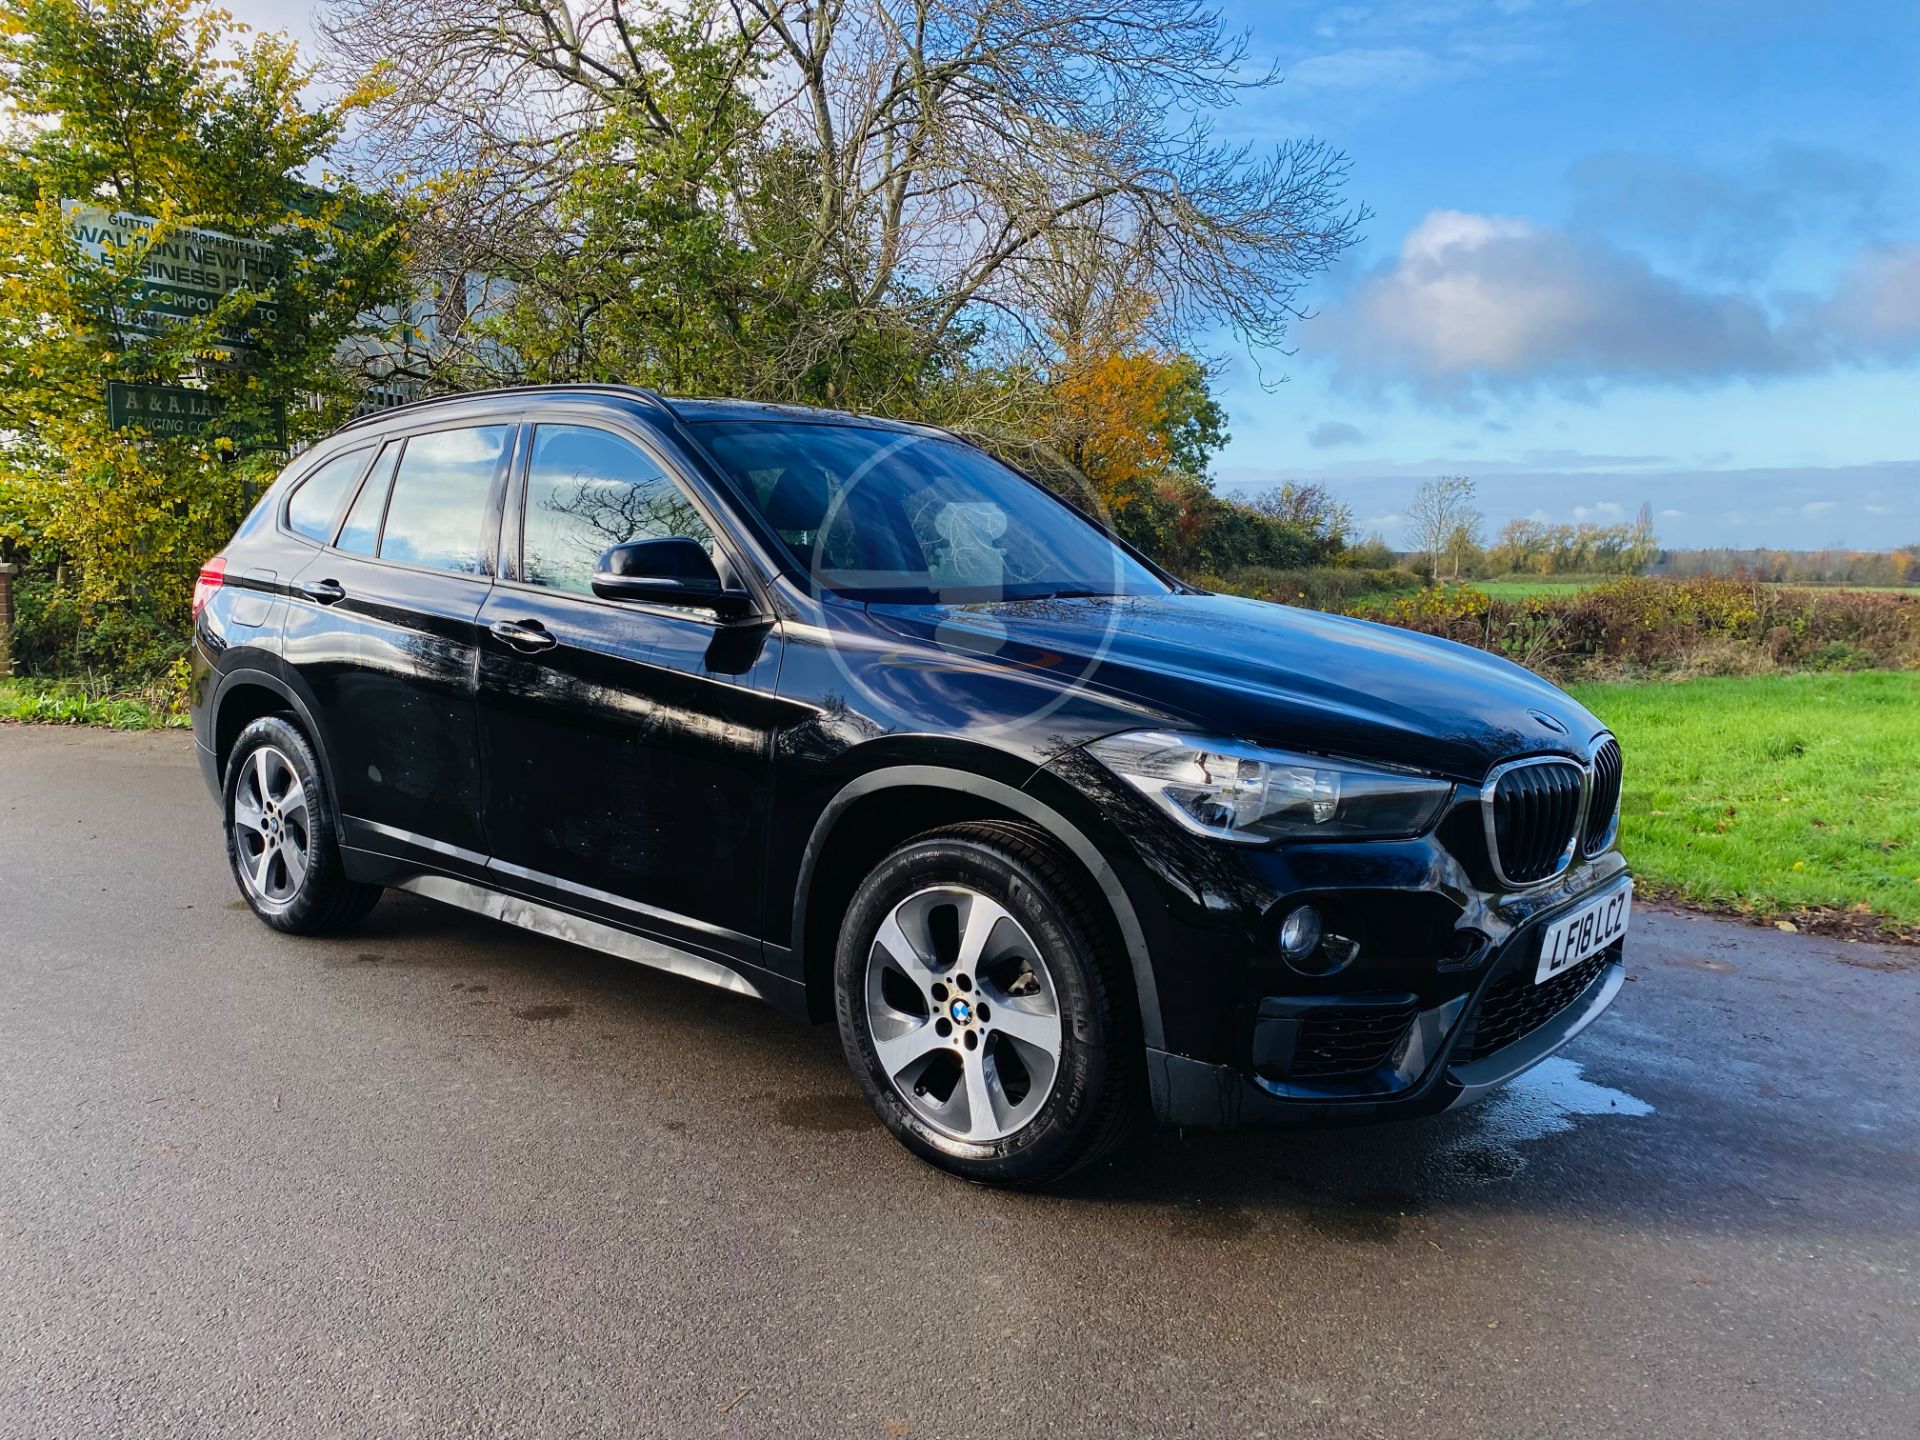 (ON SALE) BMW X1 sDRIVE 18d SE 2.0 DIESEL - 18 REG - 1 OWNER FROM NEW - SAT NAV - AIR CON - - Image 2 of 36